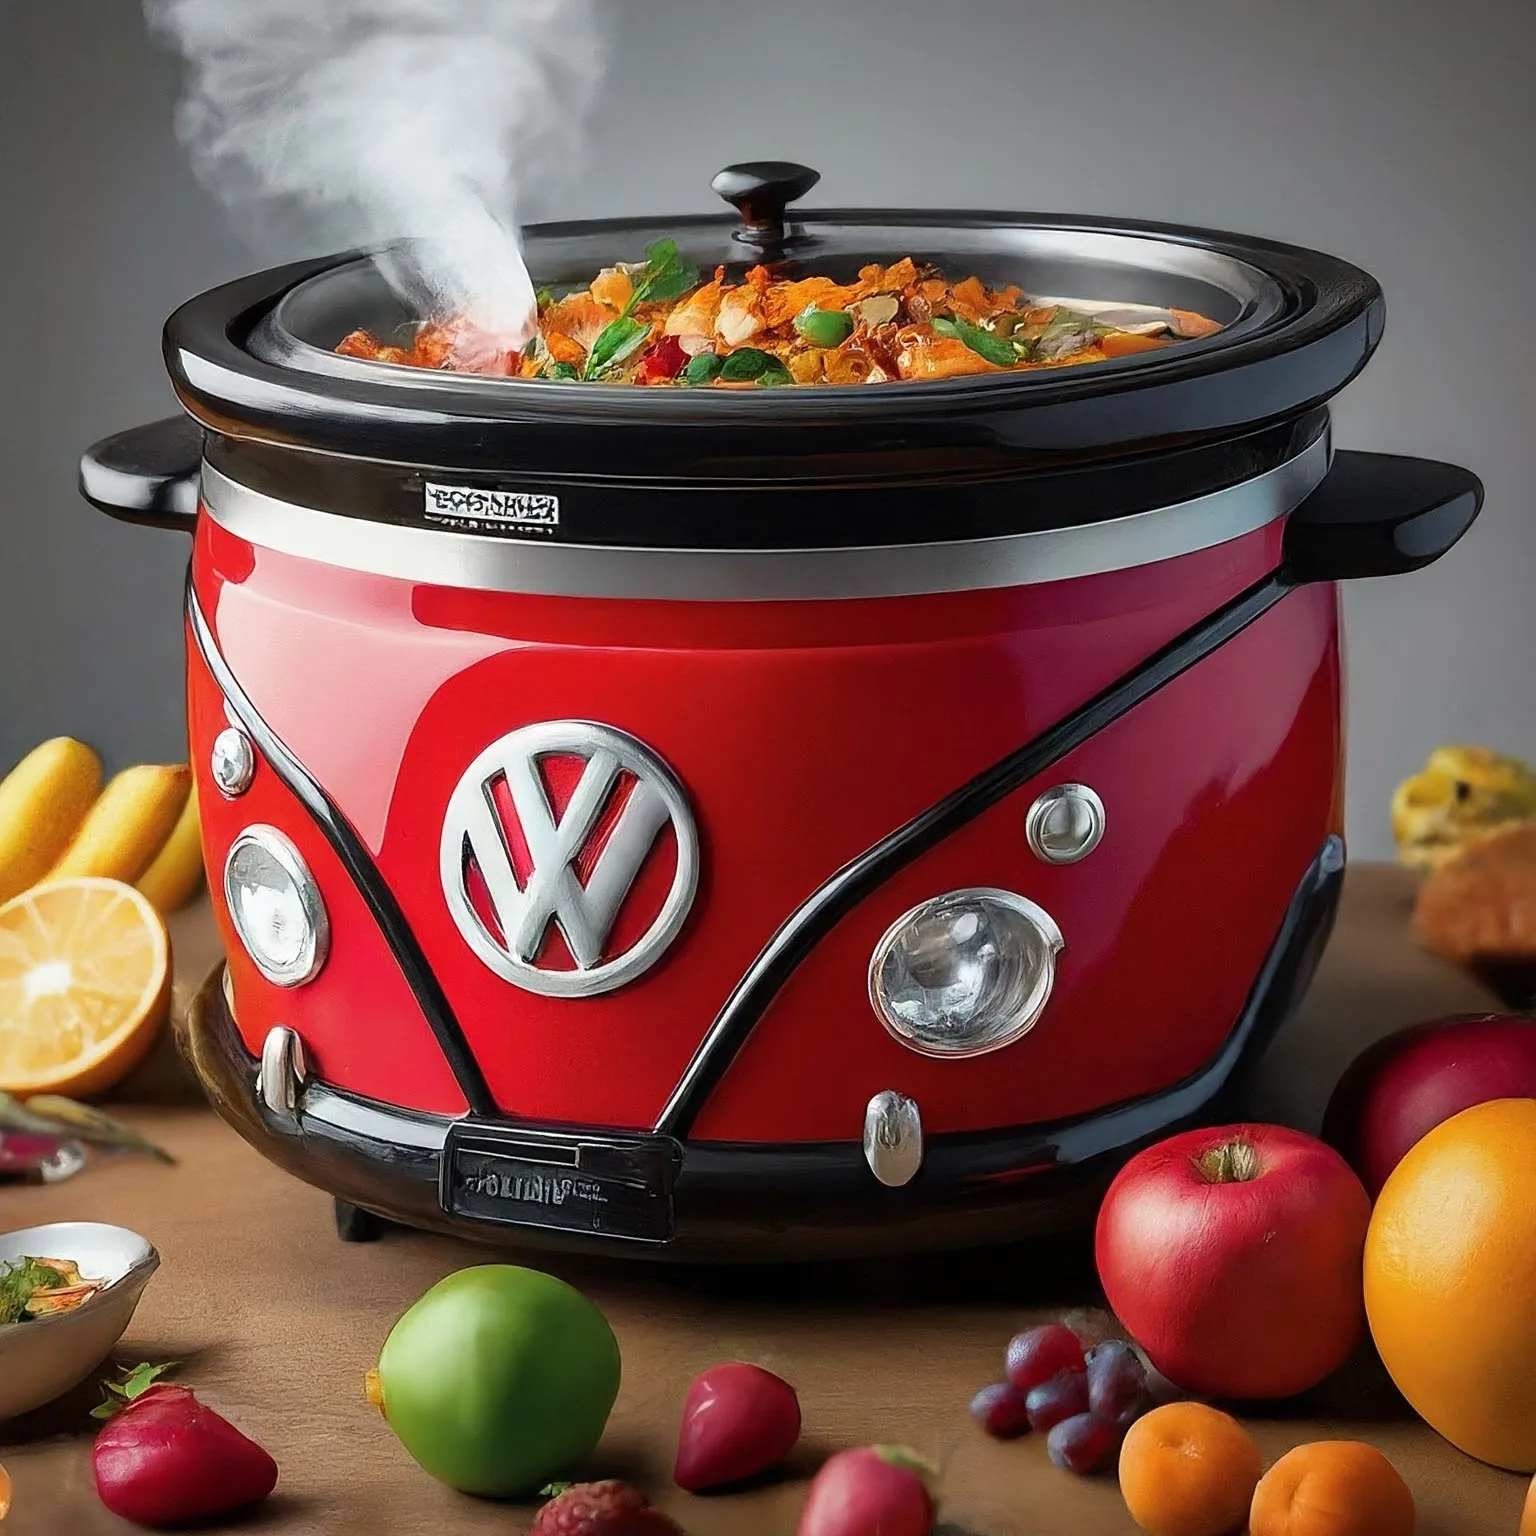 Volkswagen Bus Shaped Slow Cookers: Combining Vintage Charm with Kitchen Innovation